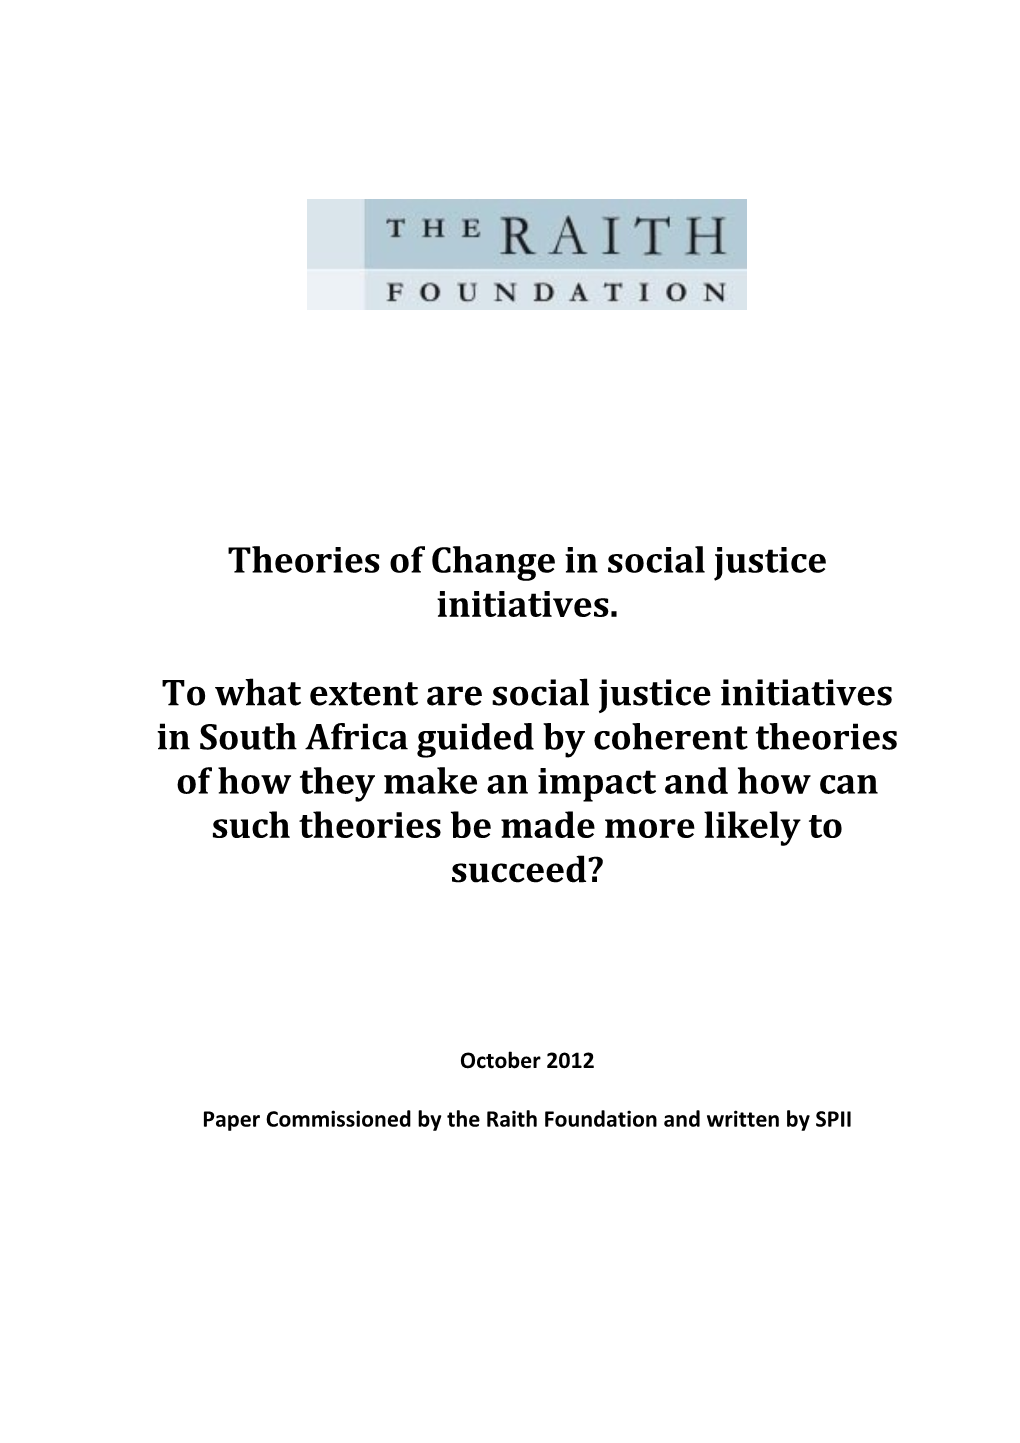 Theories of Change in Social Justice Initiatives